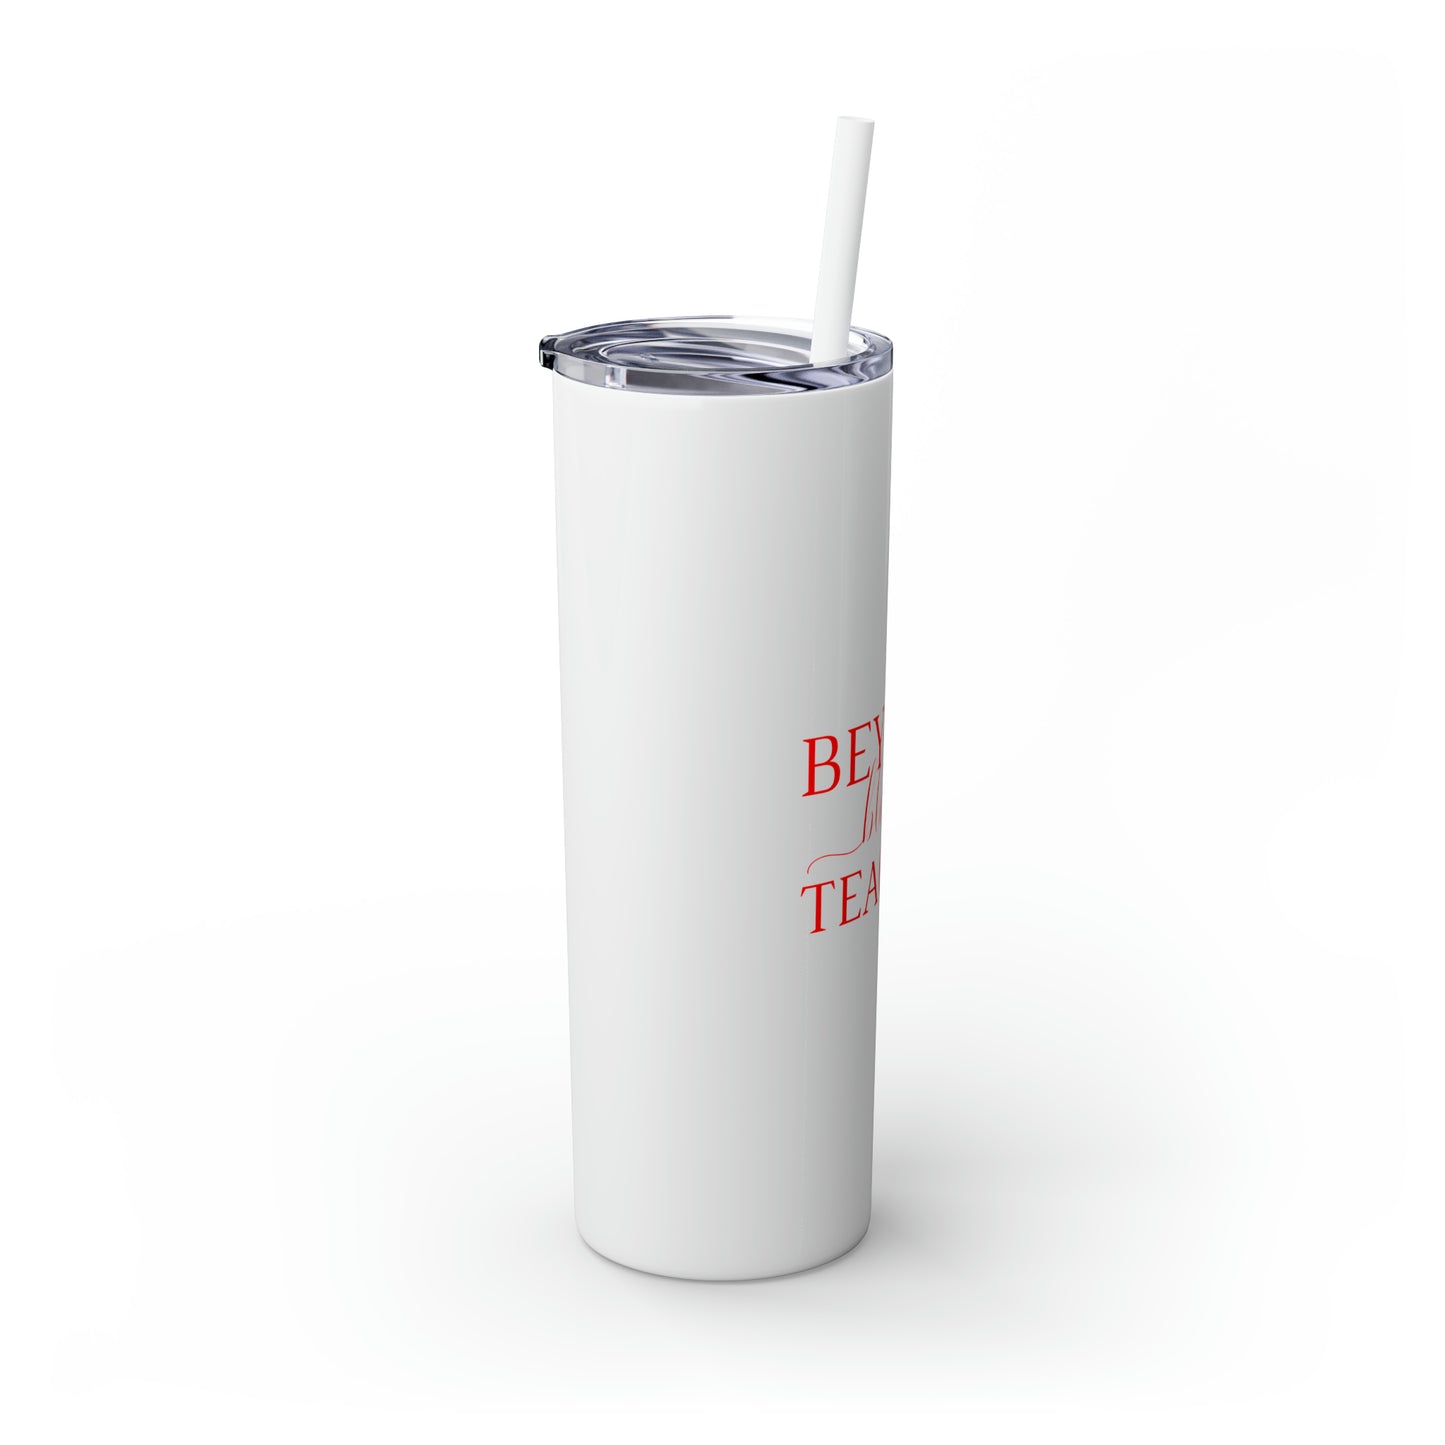 Beyond Blessed Teacher - Plain Skinny Tumbler with Straw, 20oz - Red